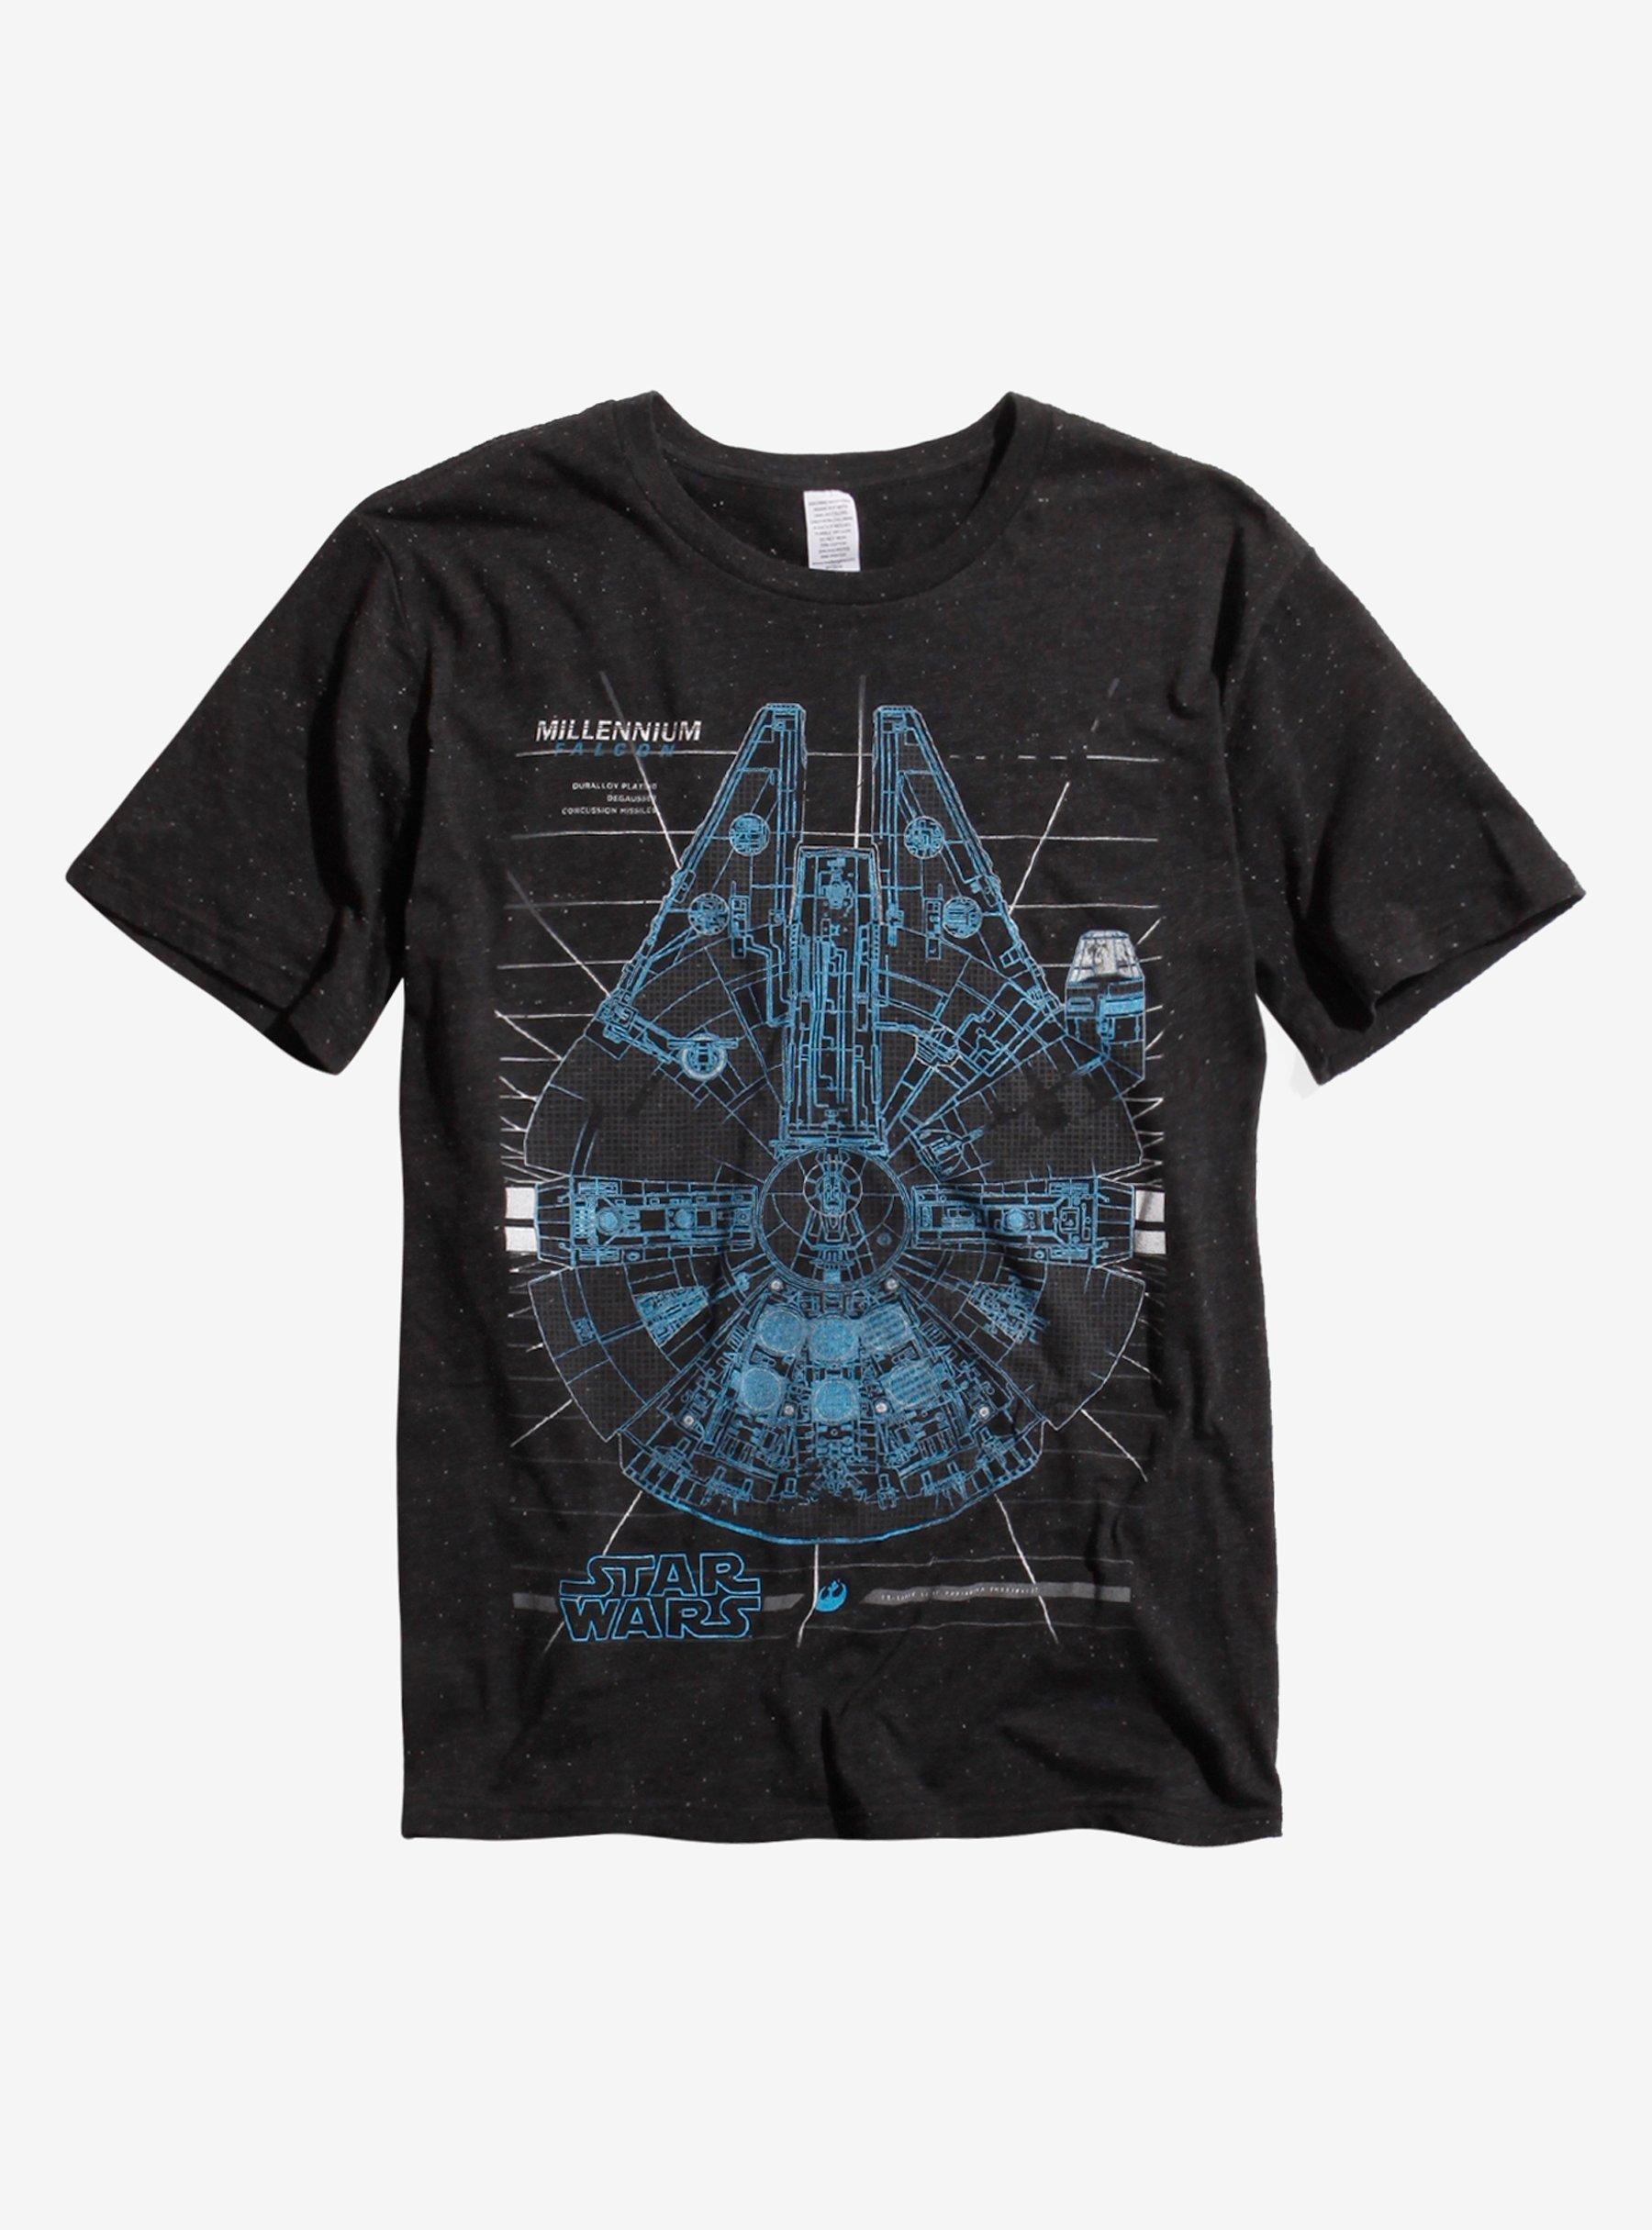 Star Wars Millennium Falcon Speckled T-Shirt | Hot Topic